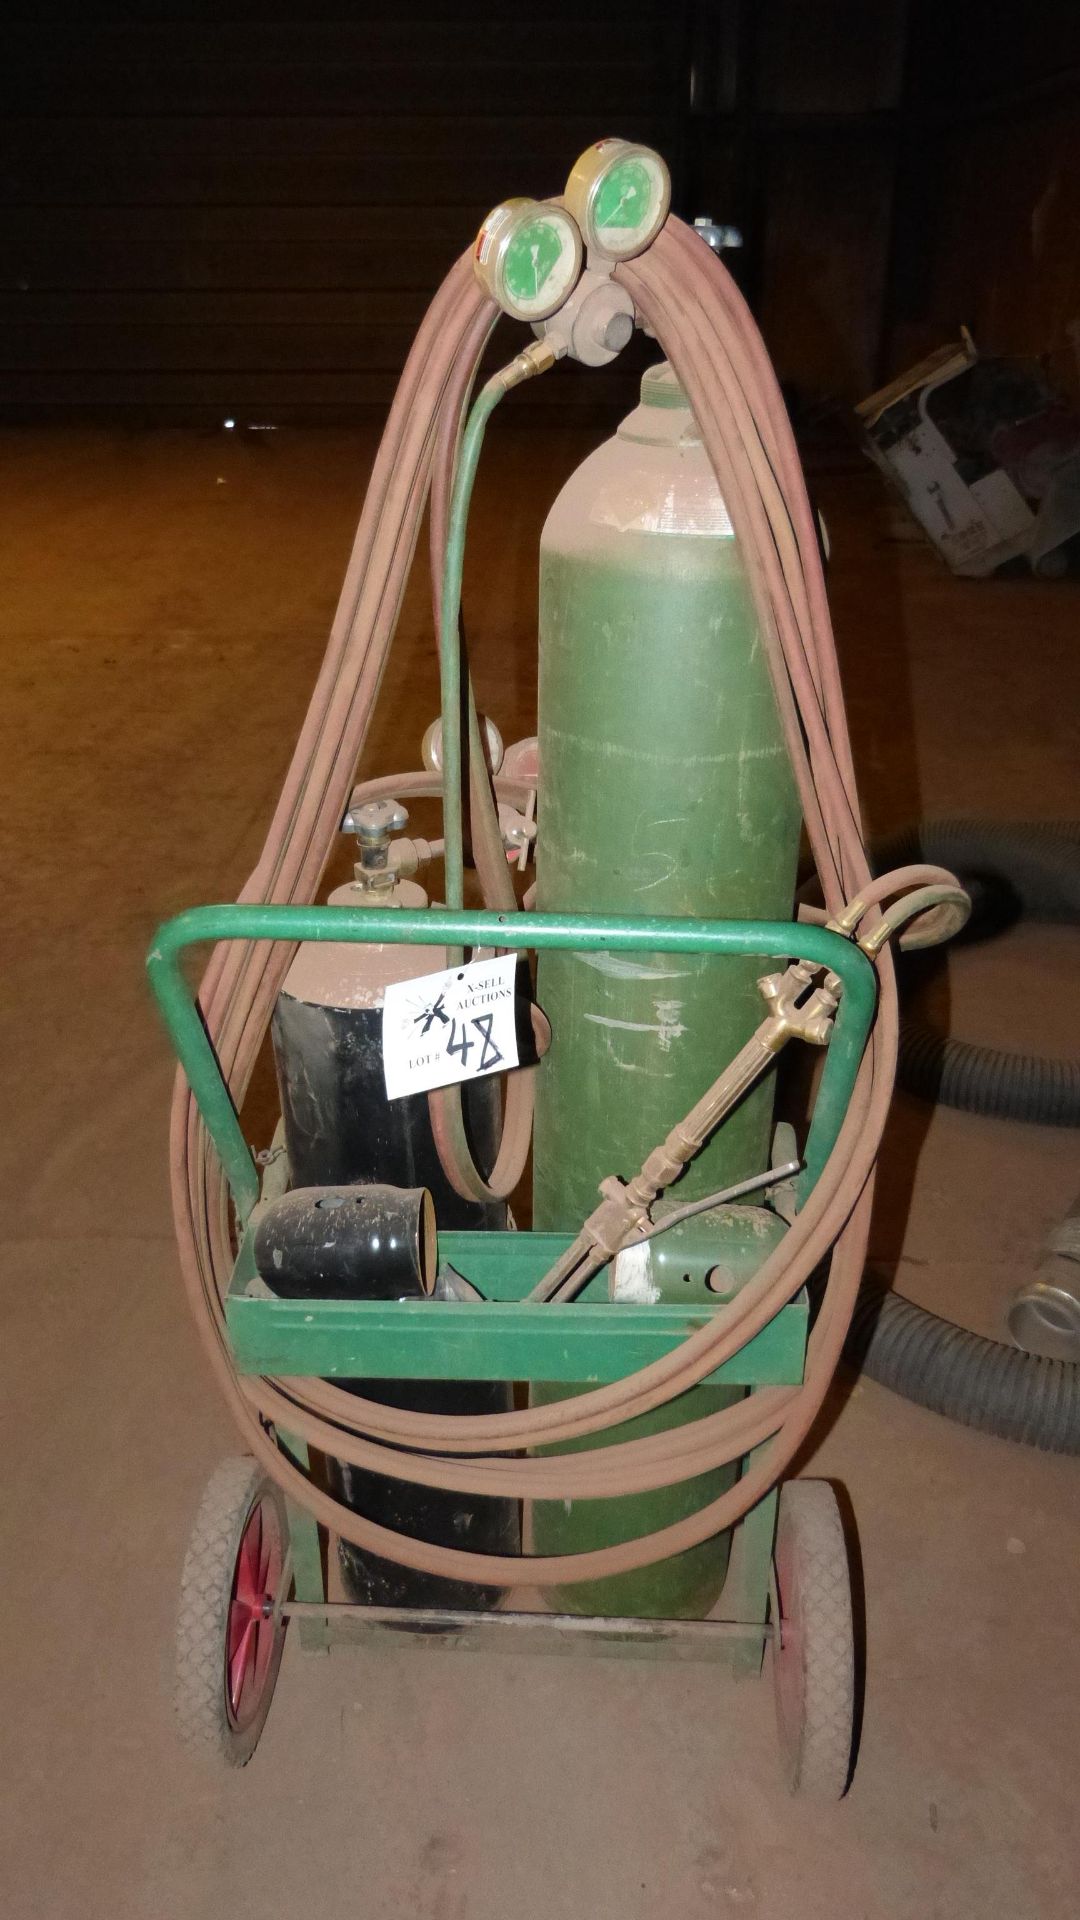 TORCH, HOSES AND CART (NO BOTTLES)